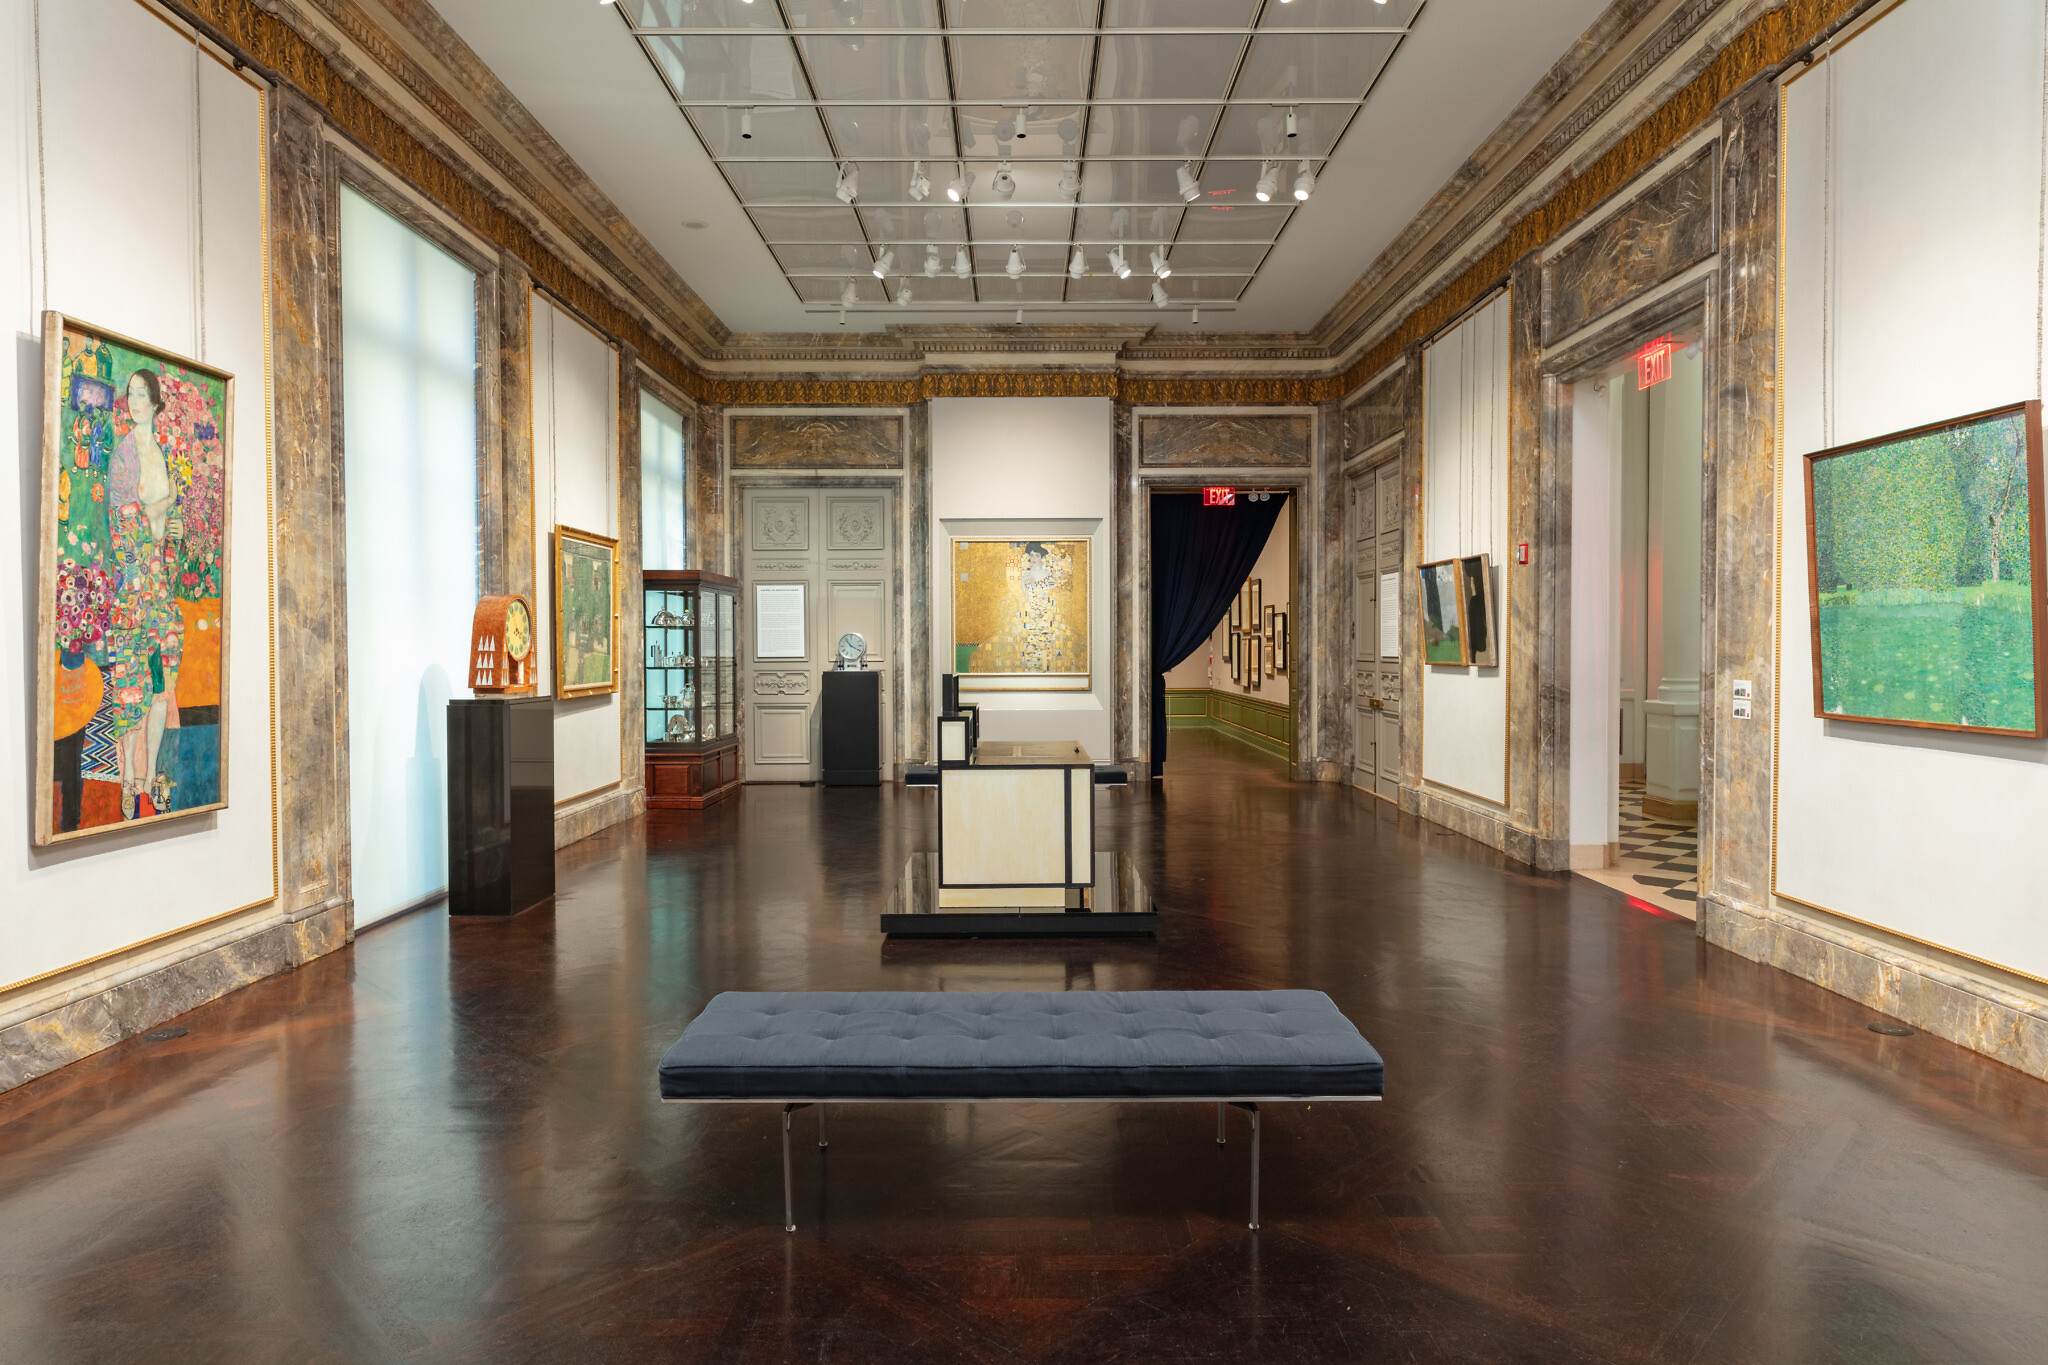 Installation view of 'The Ronald S. Lauder Collection' on view at Neue
Galerie New York. (Hulya Kolabas/ Courtesy of Neue Galerie New York)